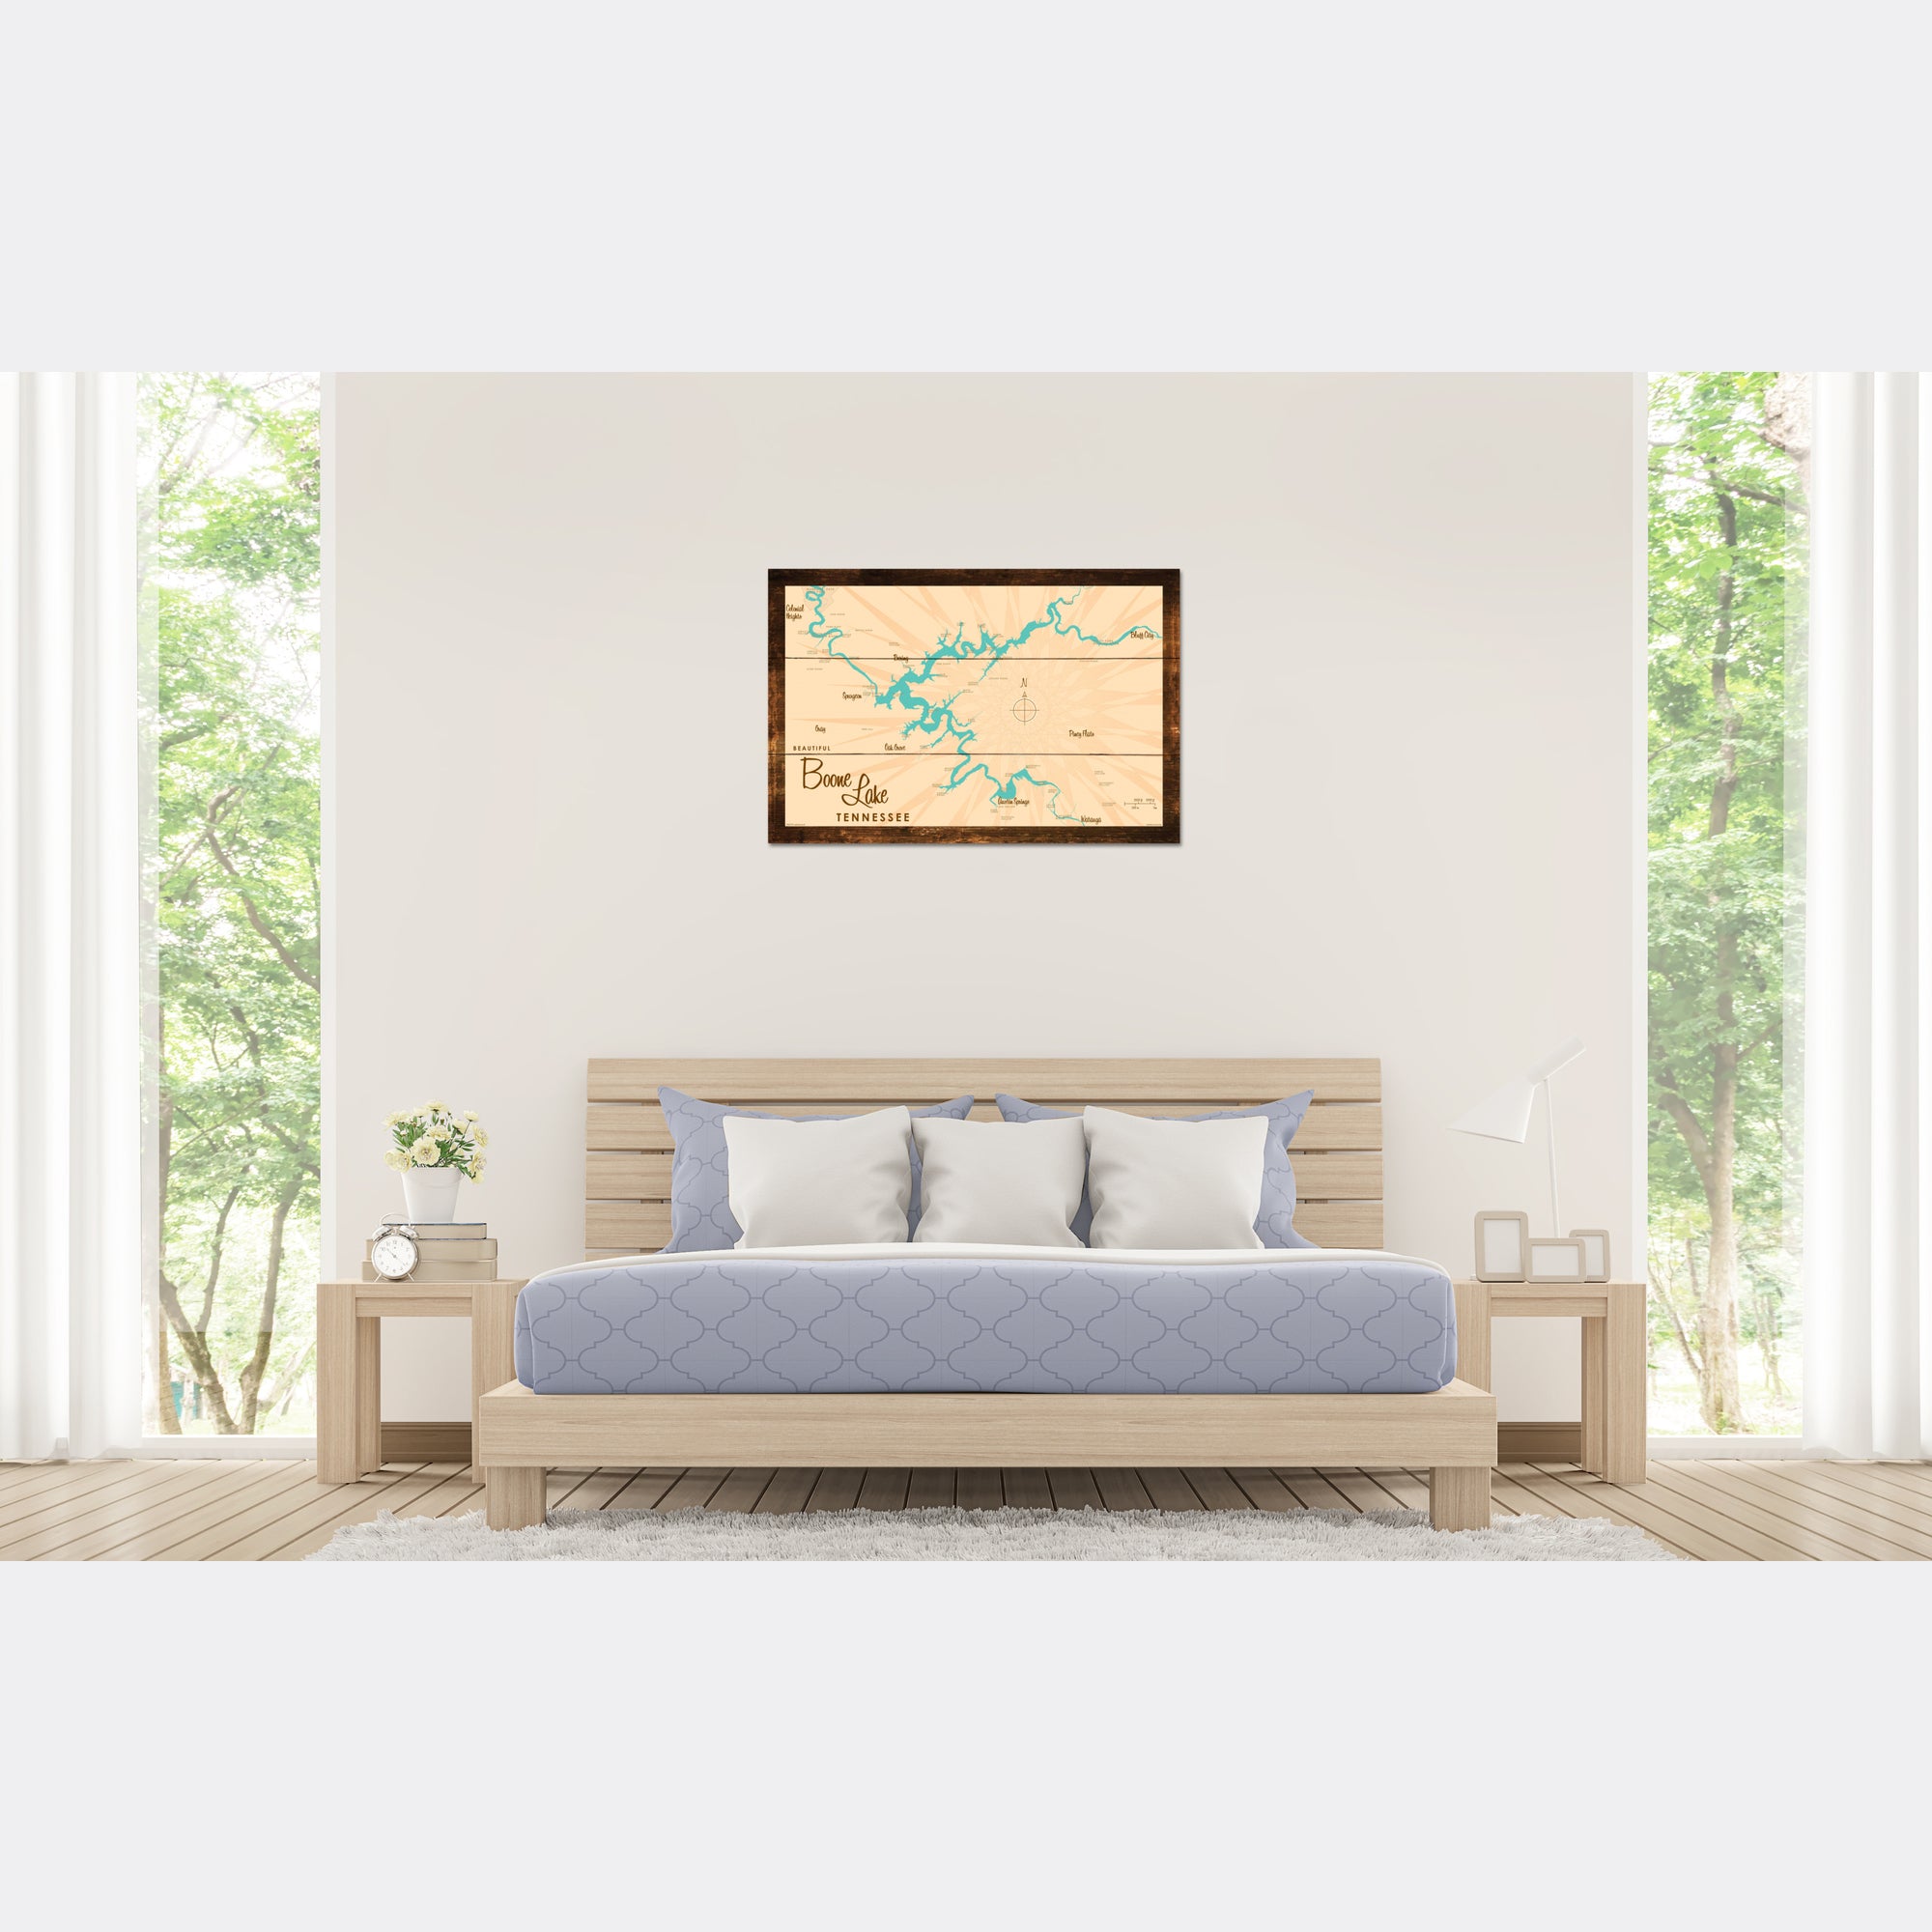 Boone Lake Tennessee, Rustic Wood Sign Map Art